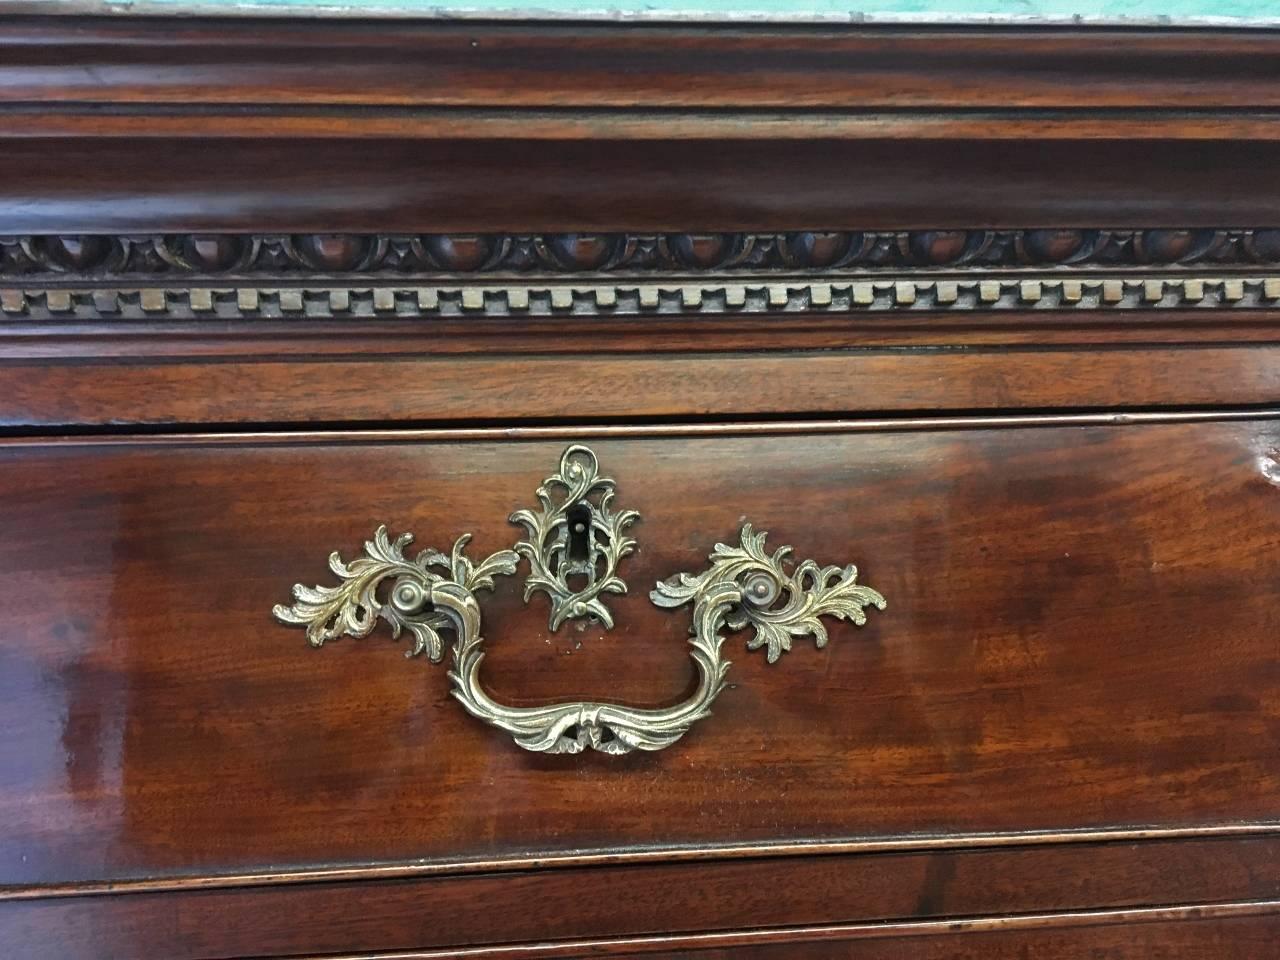 This is a superbly compact English Georgian mahogany chest on chest in fine condition. Late 18th century, it is in beautiful condition. A very pretty chest upon chest which we have carried out only light restoration and wax polished to show off the